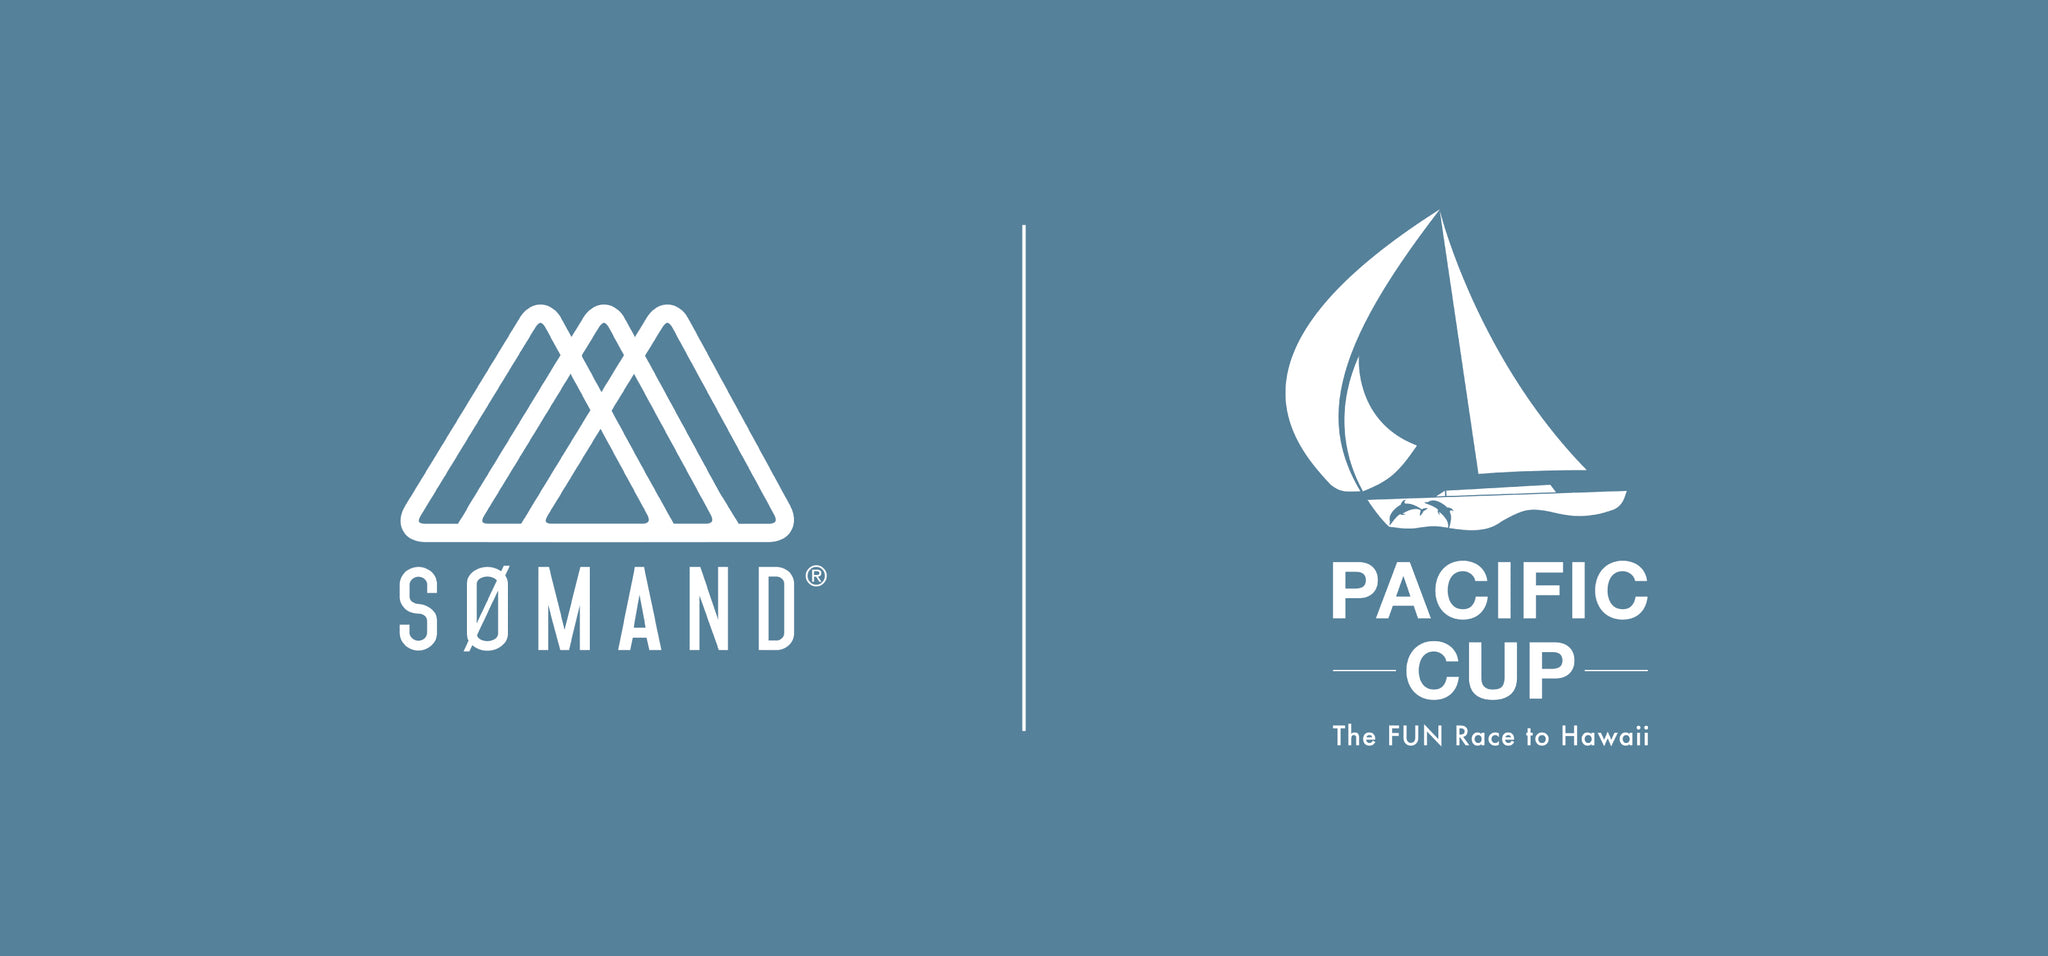 Somand sponsors Pacific Cup Yacht Race